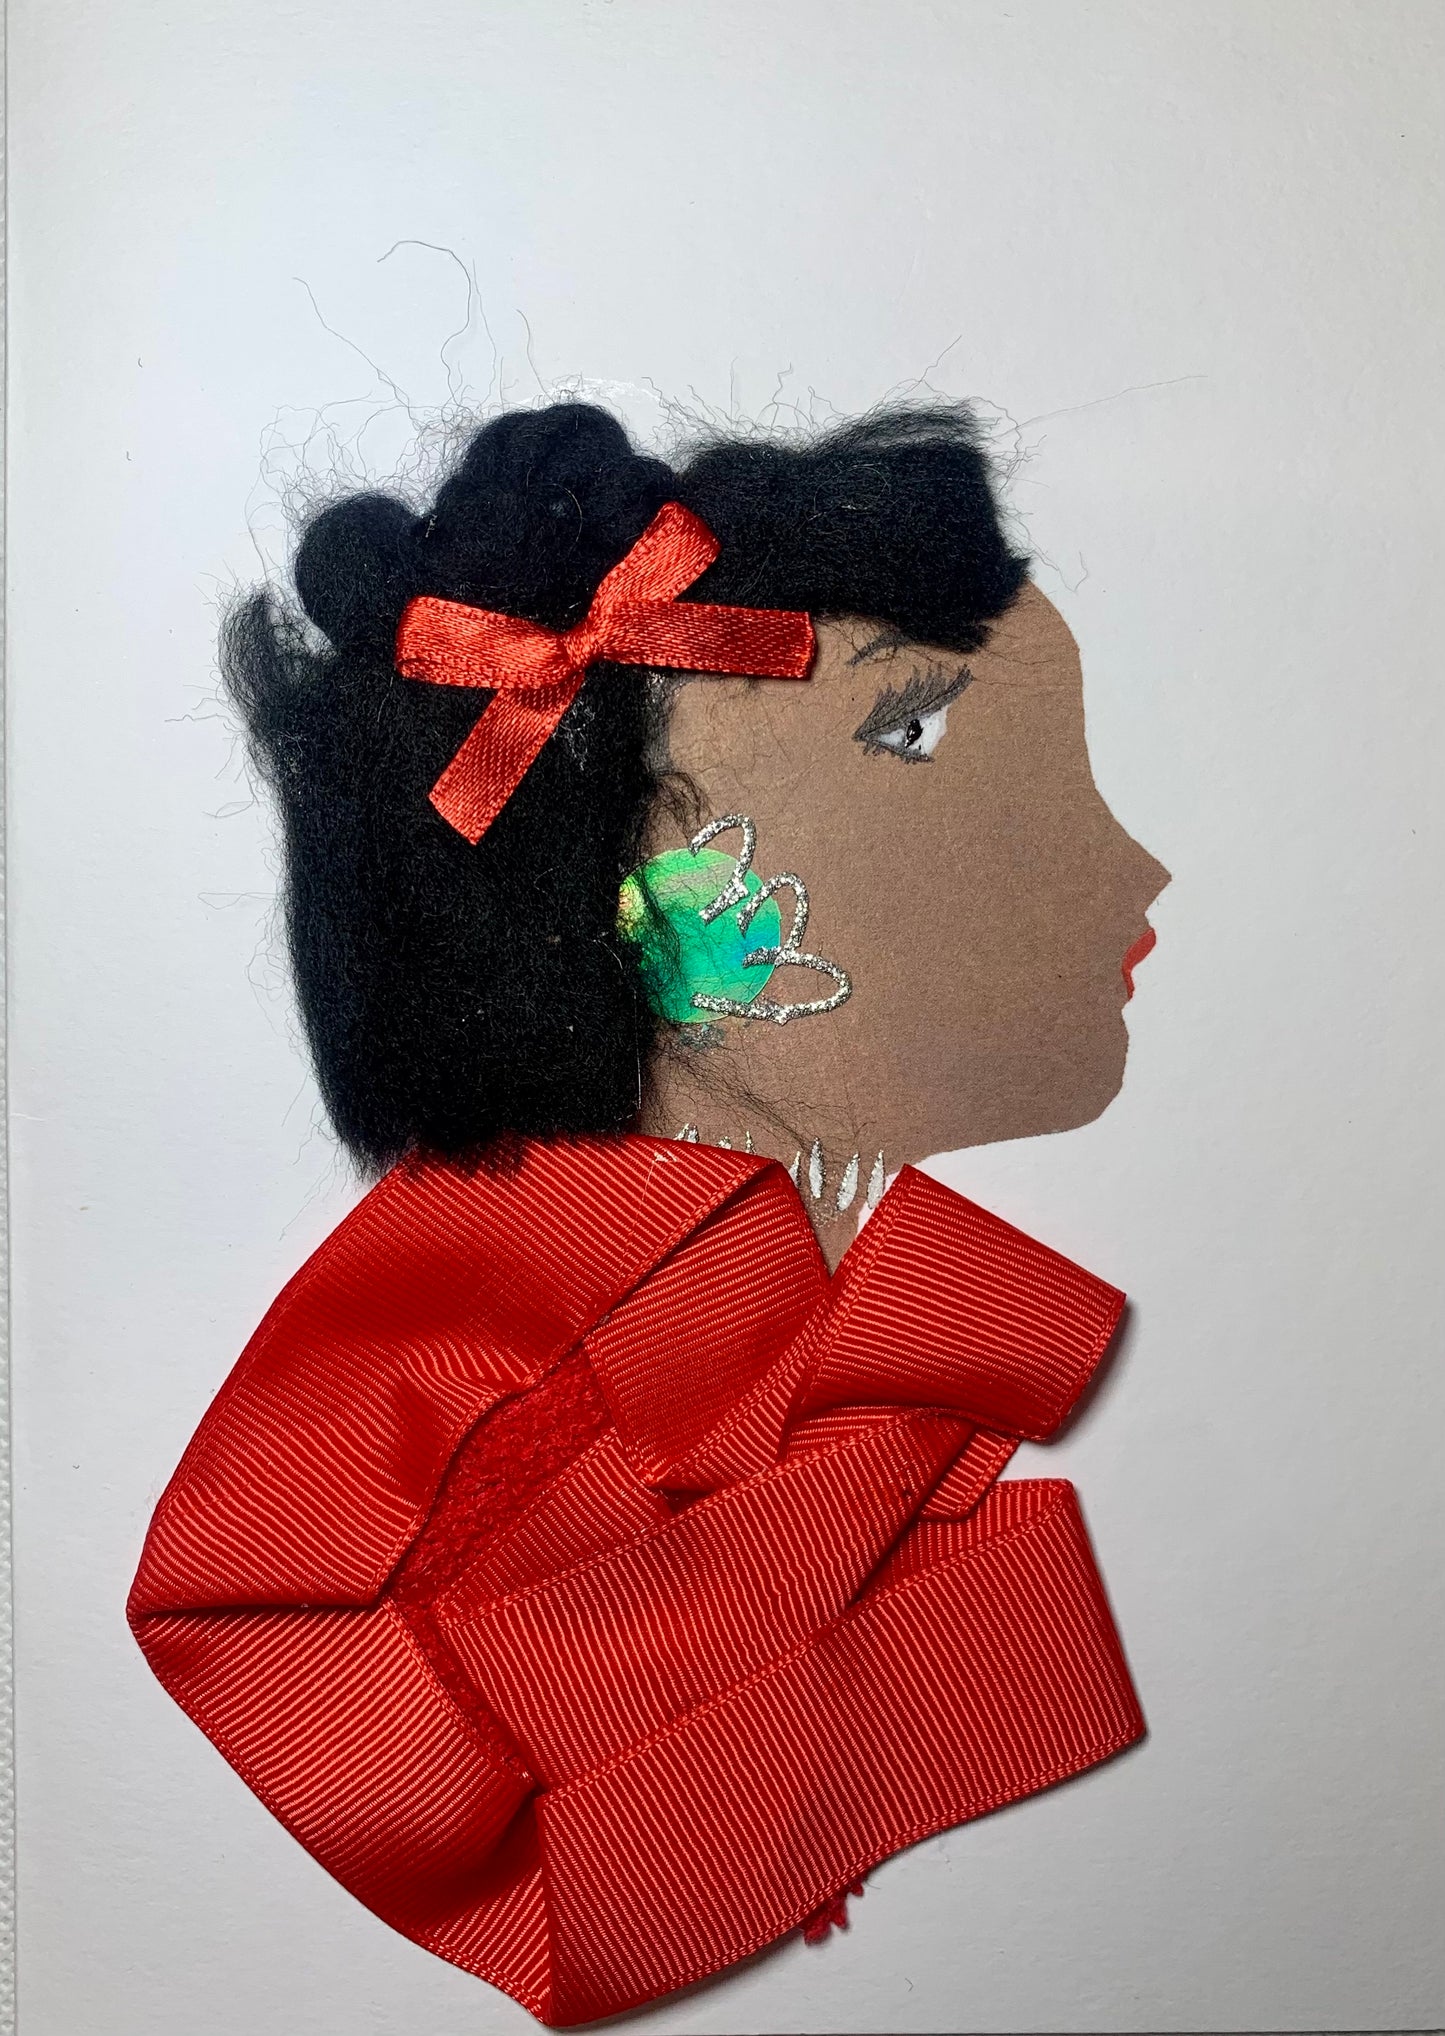 I designed this card of a woman who is named is Totteridge Tilly. She has a brown skin tone and wears a red ribbon blouse with a small red satin bow in her short black hair. She wears beautiful green and silver earrings with a silver necklace.